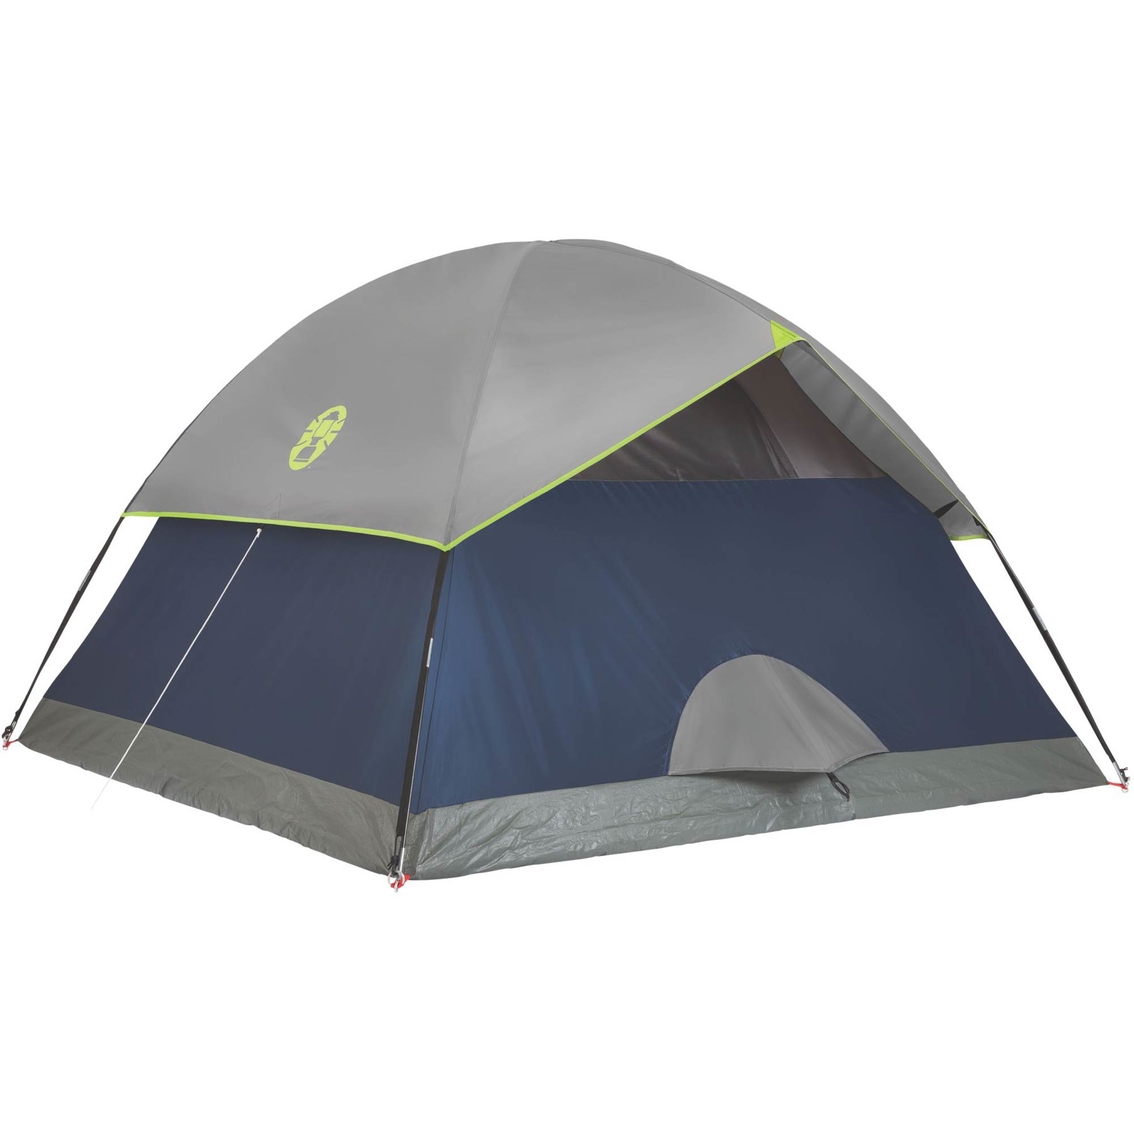 Coleman 9x7 4 Person Tent - Image 2 of 6